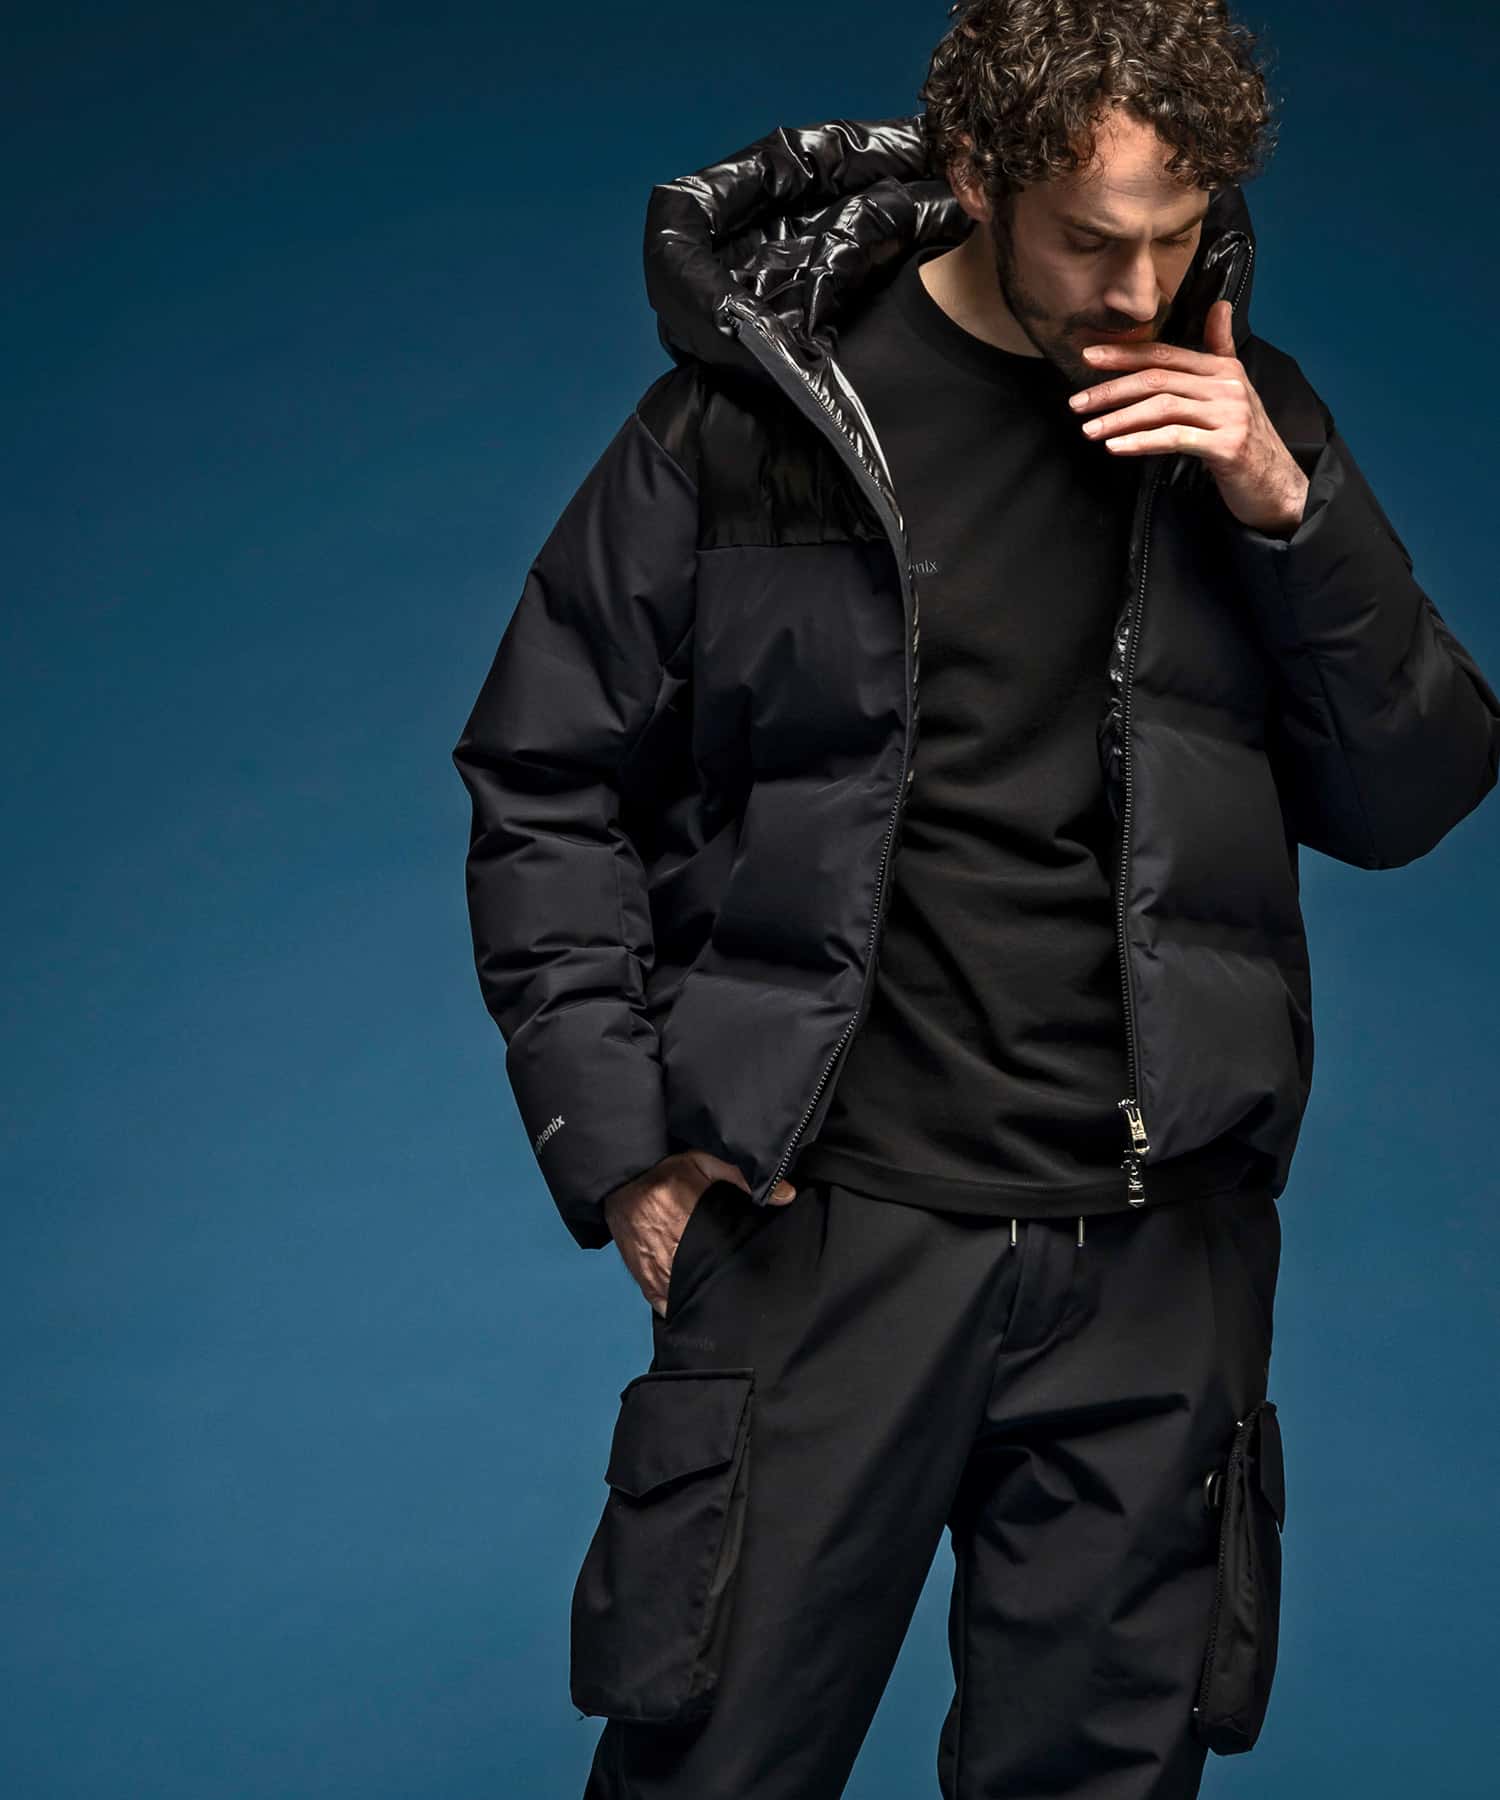 MENS】コンビダウンジャケット WINDSTOPPER(R) プロダクト by GORE-TEX 